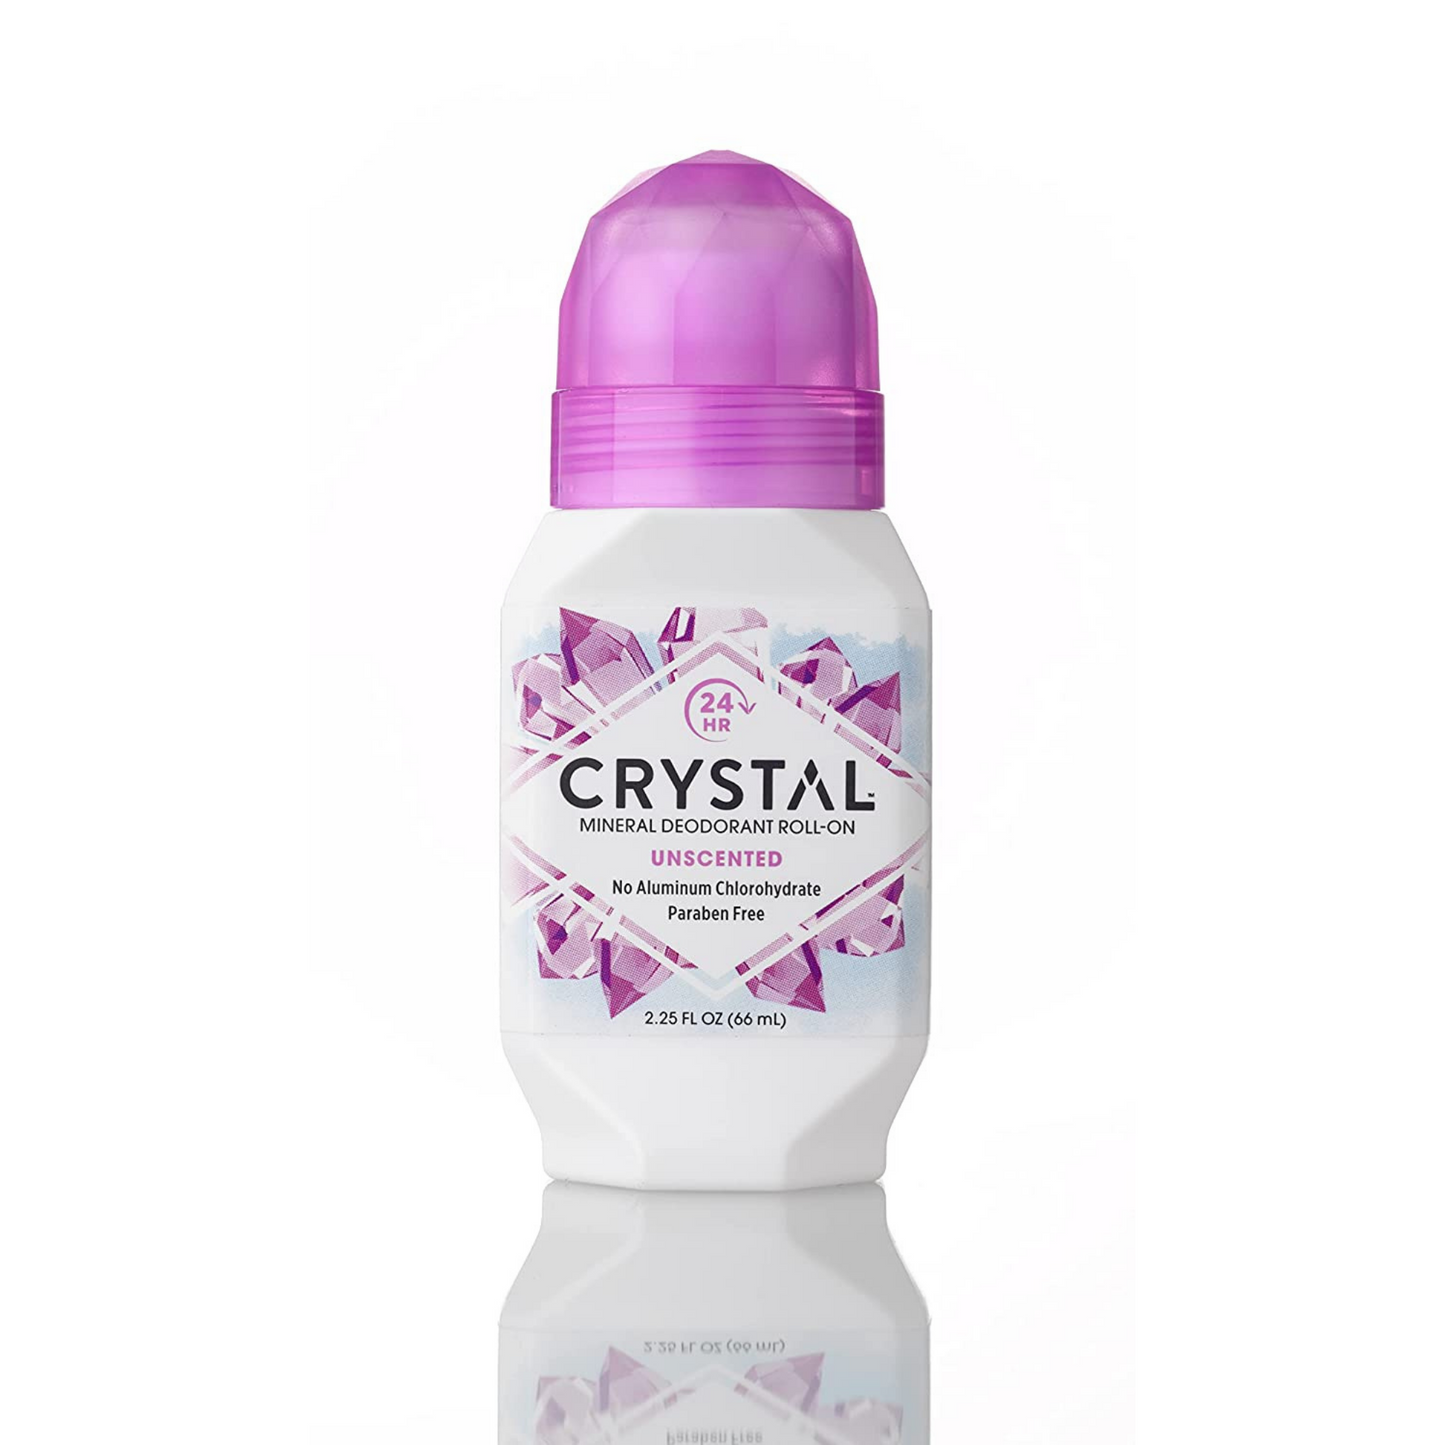 Primary image of Crystal Deo Roll-on